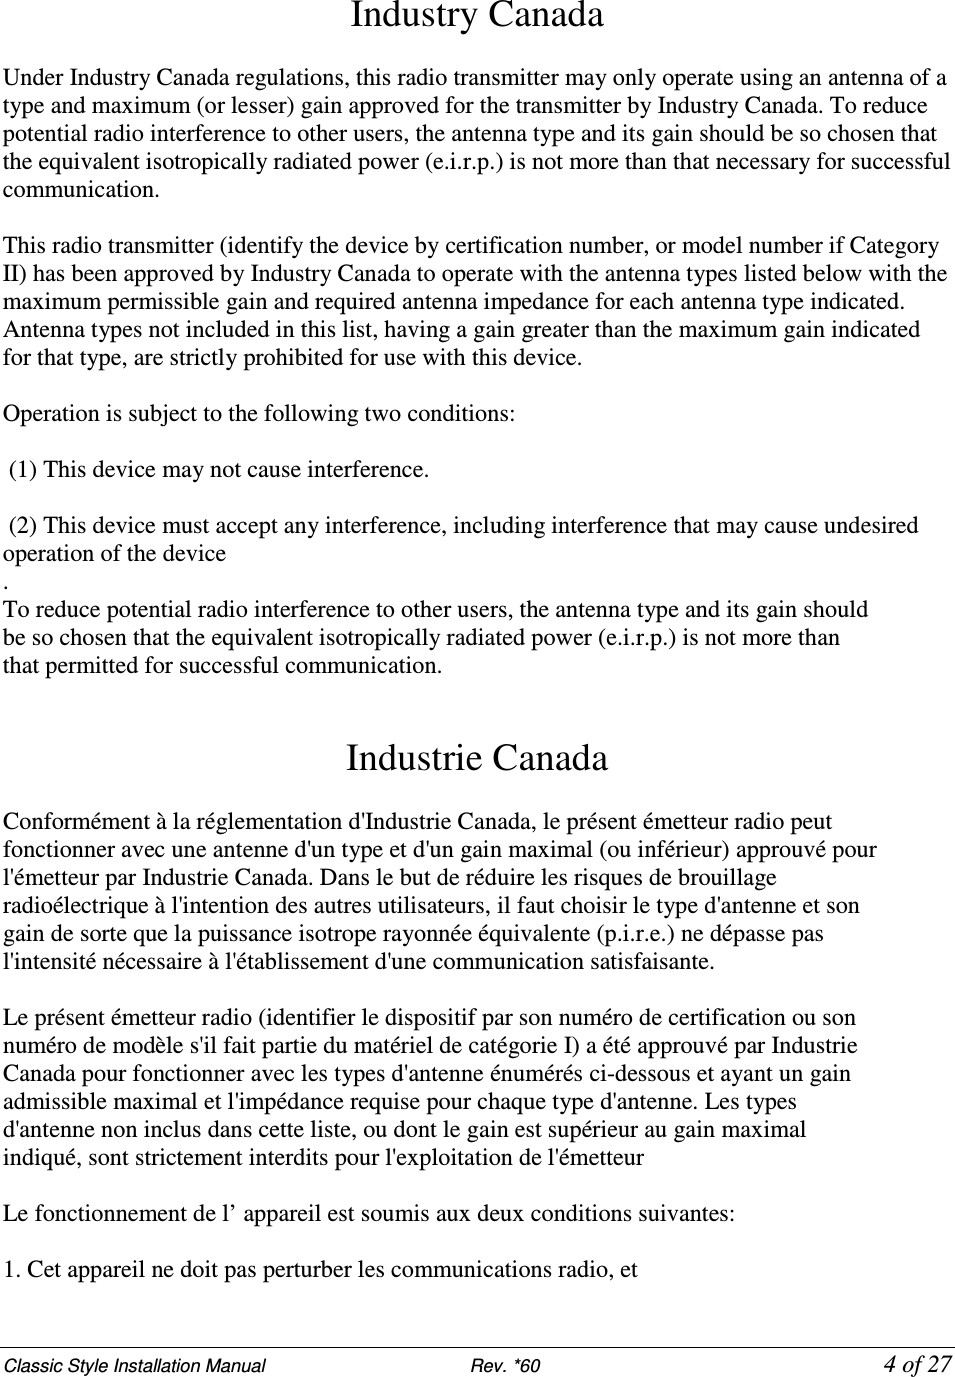 Classic Style Installation Manual                           Rev. *60           4 of 27 Industry Canada   Under Industry Canada regulations, this radio transmitter may only operate using an antenna of a type and maximum (or lesser) gain approved for the transmitter by Industry Canada. To reduce potential radio interference to other users, the antenna type and its gain should be so chosen that the equivalent isotropically radiated power (e.i.r.p.) is not more than that necessary for successful communication.  This radio transmitter (identify the device by certification number, or model number if Category II) has been approved by Industry Canada to operate with the antenna types listed below with the maximum permissible gain and required antenna impedance for each antenna type indicated. Antenna types not included in this list, having a gain greater than the maximum gain indicated for that type, are strictly prohibited for use with this device.  Operation is subject to the following two conditions:   (1) This device may not cause interference.   (2) This device must accept any interference, including interference that may cause undesired operation of the device . To reduce potential radio interference to other users, the antenna type and its gain should be so chosen that the equivalent isotropically radiated power (e.i.r.p.) is not more than that permitted for successful communication.   Industrie Canada  Conformément à la réglementation d&apos;Industrie Canada, le présent émetteur radio peut fonctionner avec une antenne d&apos;un type et d&apos;un gain maximal (ou inférieur) approuvé pour l&apos;émetteur par Industrie Canada. Dans le but de réduire les risques de brouillage radioélectrique à l&apos;intention des autres utilisateurs, il faut choisir le type d&apos;antenne et son gain de sorte que la puissance isotrope rayonnée équivalente (p.i.r.e.) ne dépasse pas l&apos;intensité nécessaire à l&apos;établissement d&apos;une communication satisfaisante.  Le présent émetteur radio (identifier le dispositif par son numéro de certification ou son numéro de modèle s&apos;il fait partie du matériel de catégorie I) a été approuvé par Industrie Canada pour fonctionner avec les types d&apos;antenne énumérés ci-dessous et ayant un gain admissible maximal et l&apos;impédance requise pour chaque type d&apos;antenne. Les types d&apos;antenne non inclus dans cette liste, ou dont le gain est supérieur au gain maximal indiqué, sont strictement interdits pour l&apos;exploitation de l&apos;émetteur  Le fonctionnement de l’ appareil est soumis aux deux conditions suivantes:  1. Cet appareil ne doit pas perturber les communications radio, et 